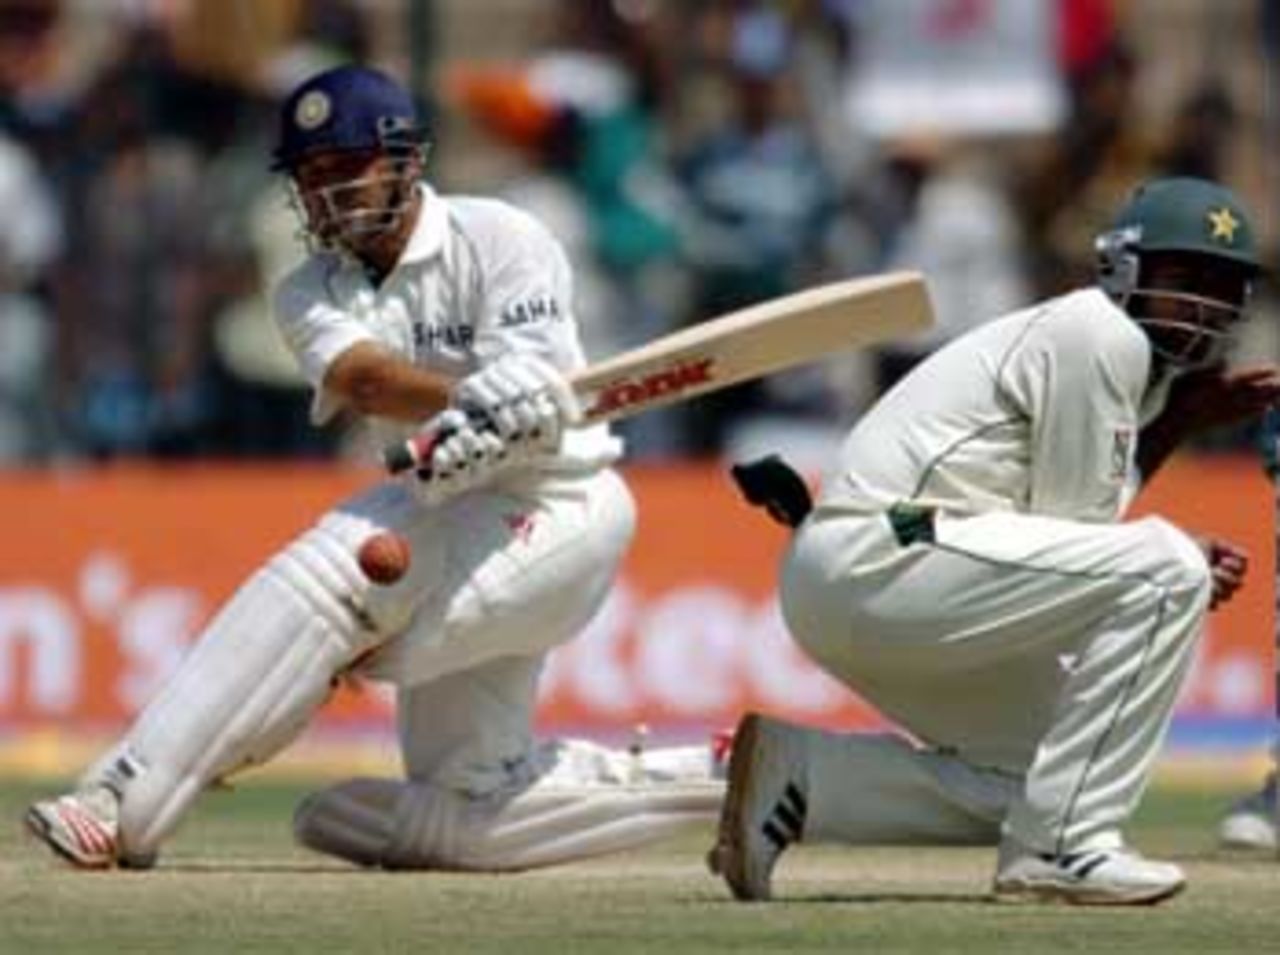 Sachin Tendulkar, the one Indian batsman with a good record at Bangalore, found his groove with the sweep, India v Pakistan, 3rd Test, Bangalore, 3rd day, March 24, 2005